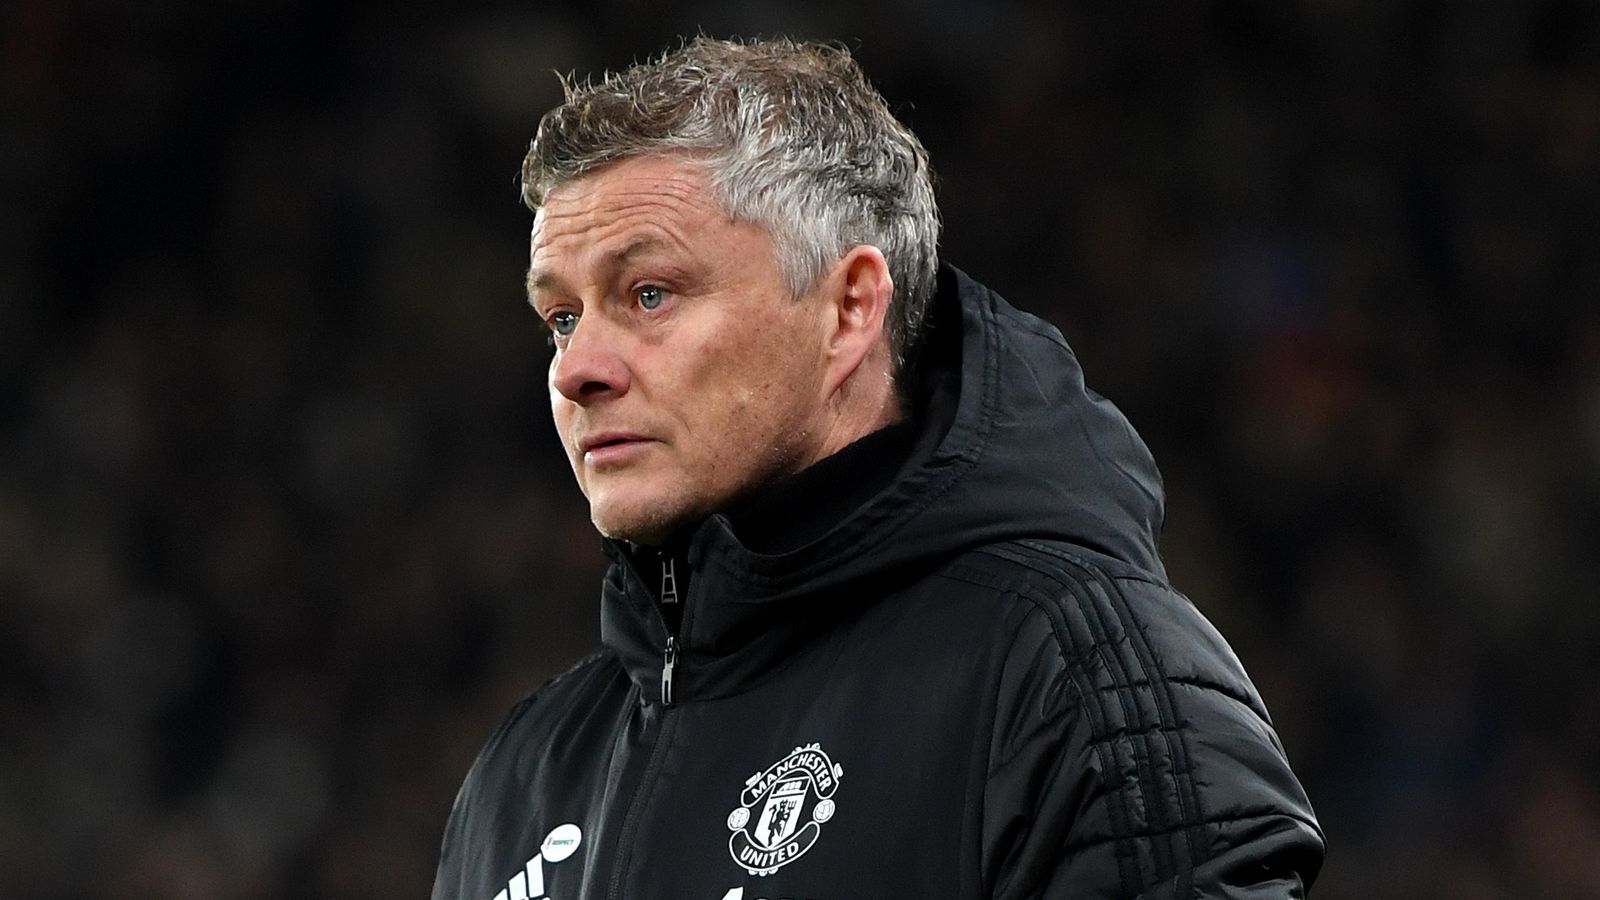 Ole Gunnar Solskjaer doesn’t want to boast about the Manchester United turnaround